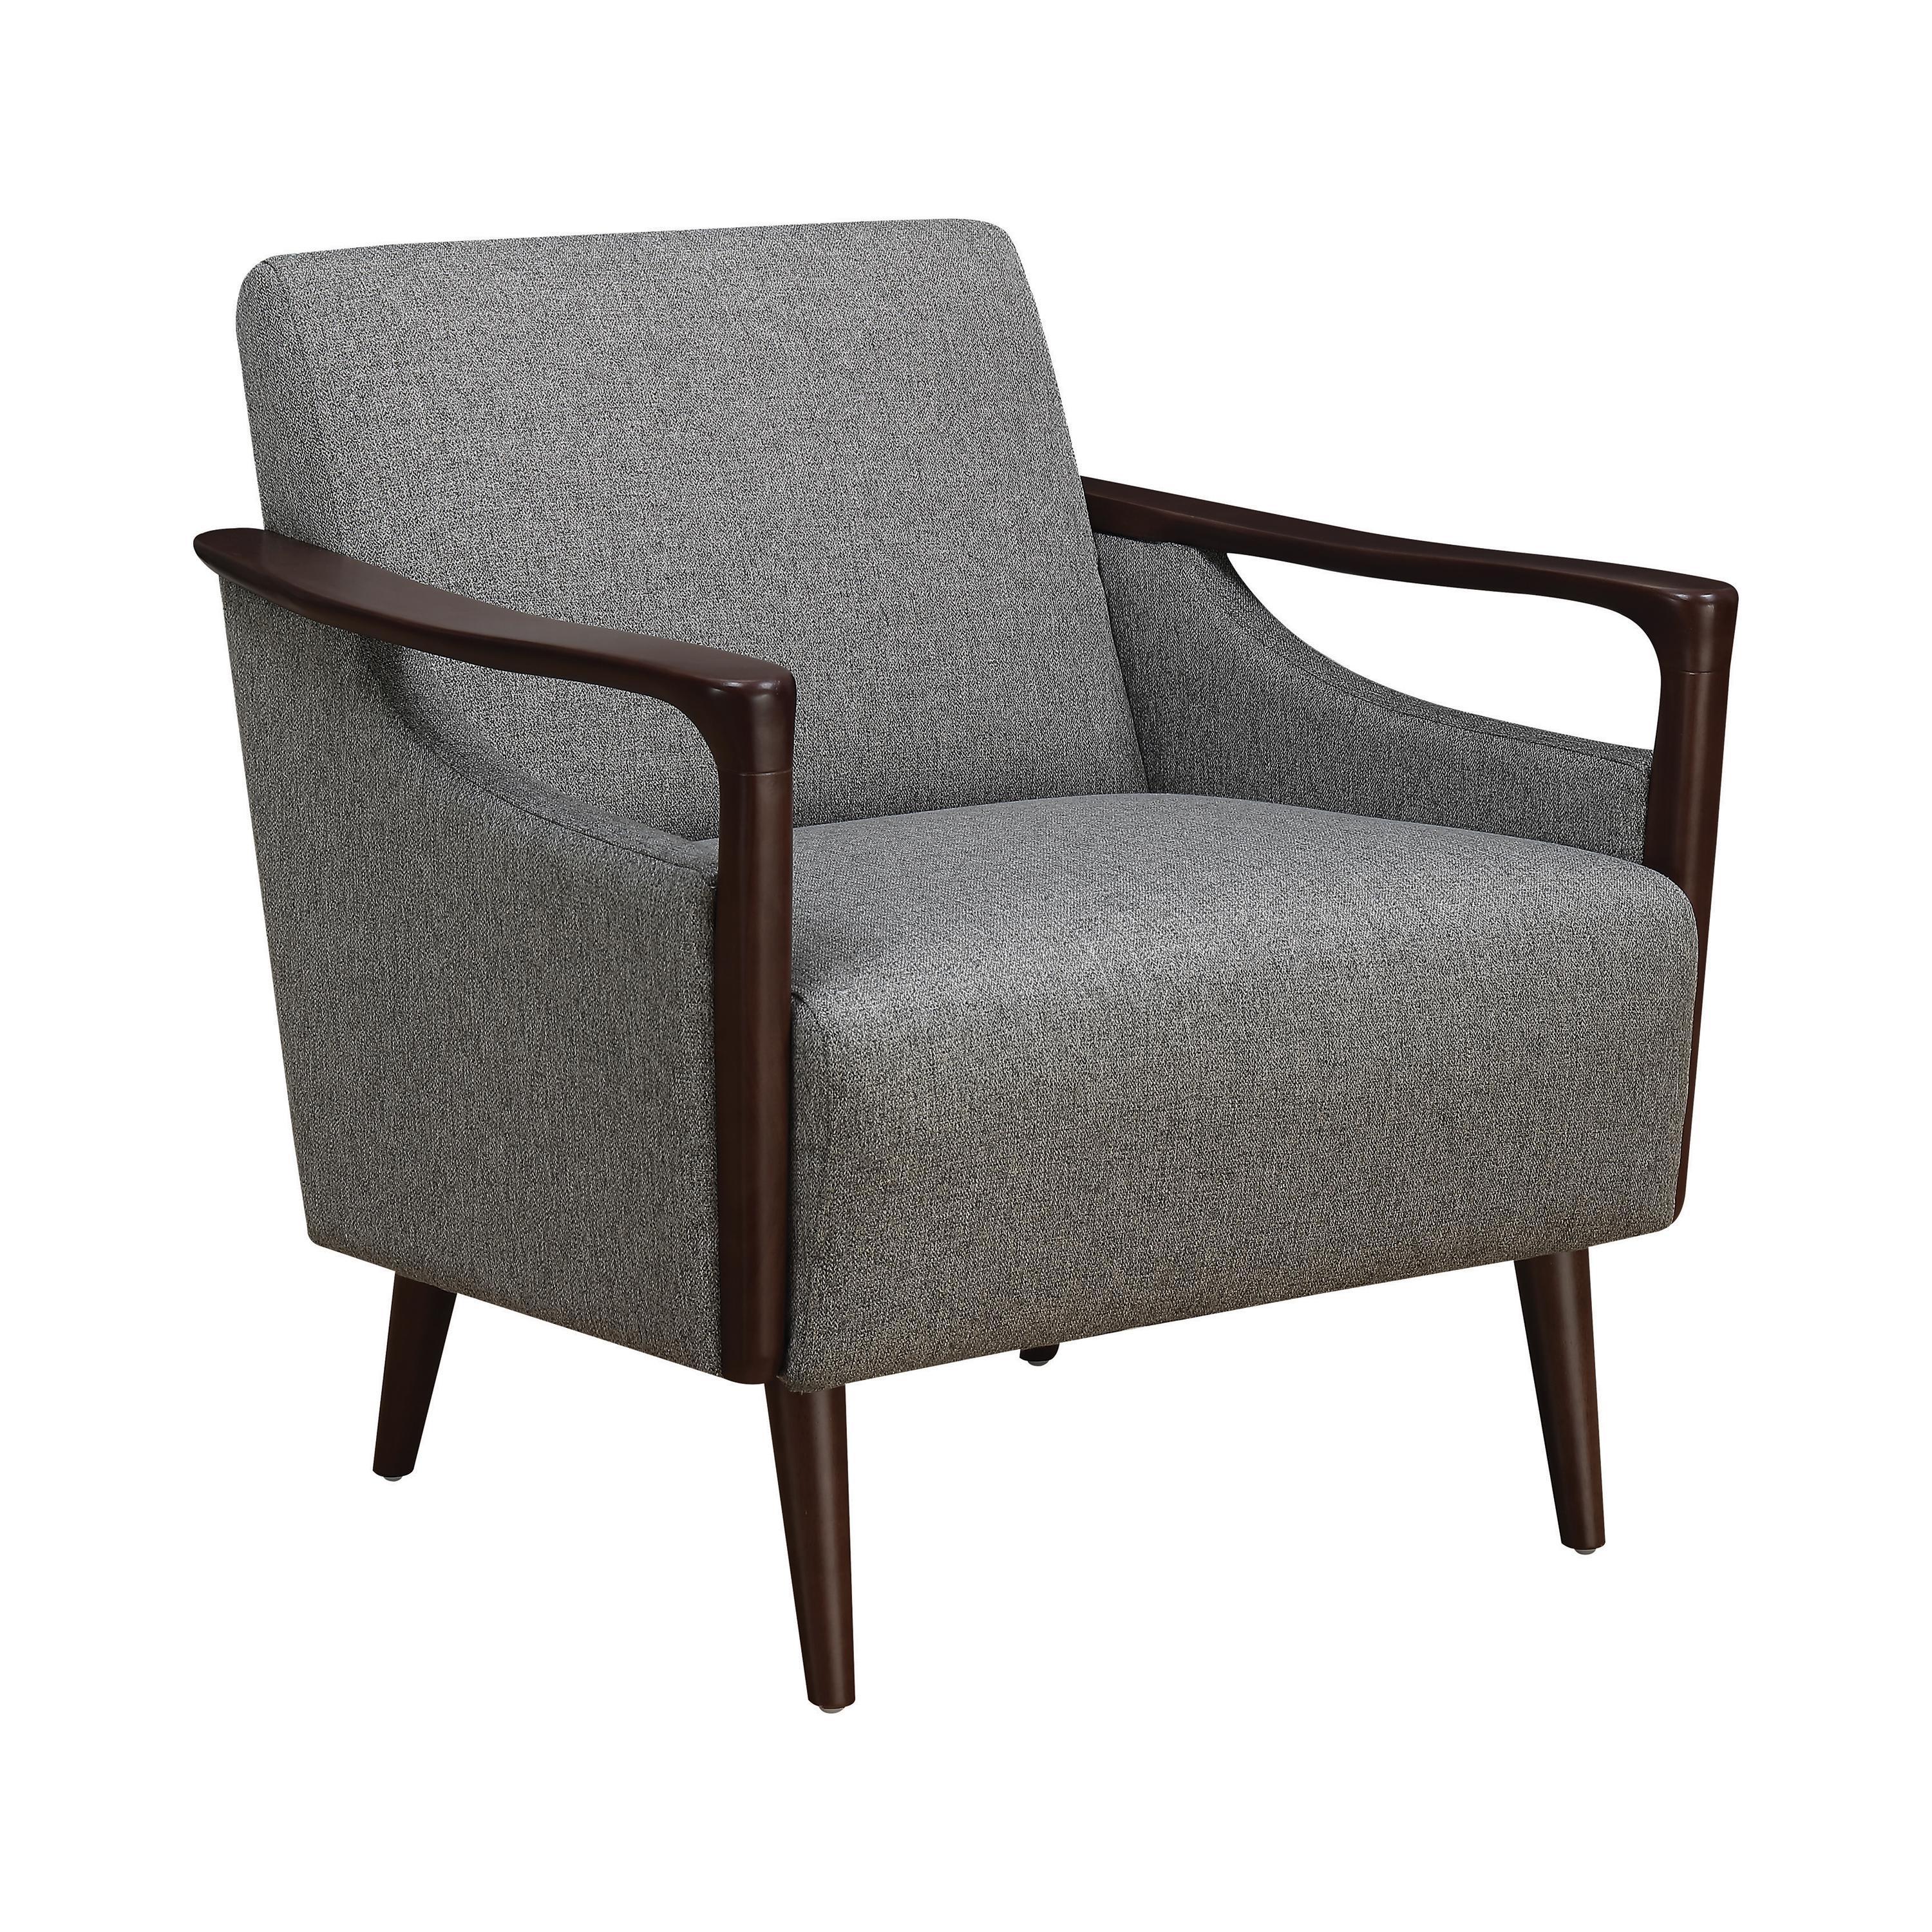 Modern Accent Chair 905392 905392 in Gray 